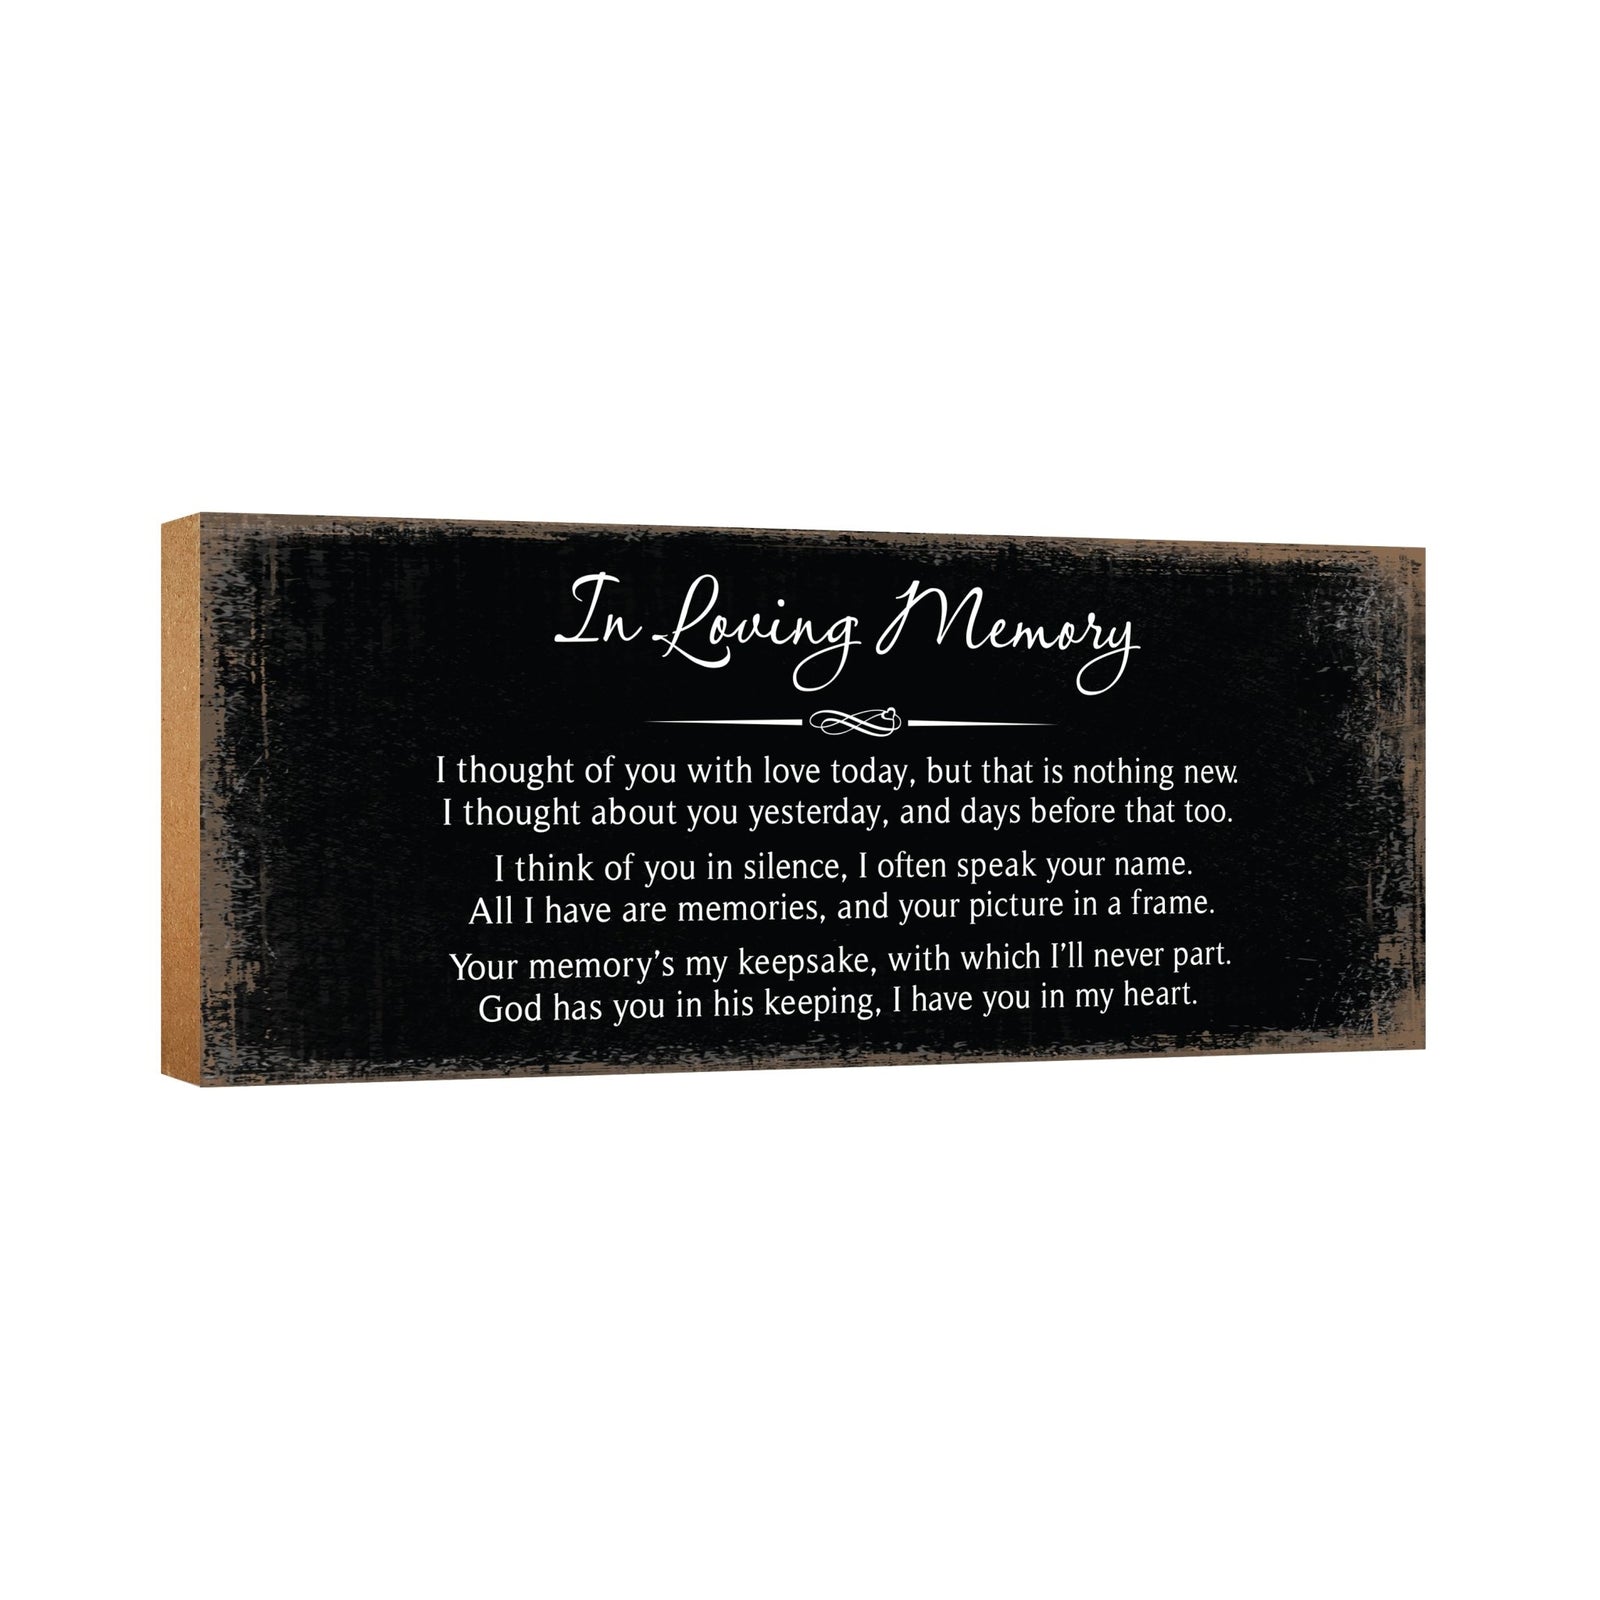 Modern Inspirational Pet Memorial 4x10 inches Wooden Sign (In Loving Memory) Tabletop Plaque Home Decoration Loss of Pet Bereavement Sympathy Keepsake - LifeSong Milestones